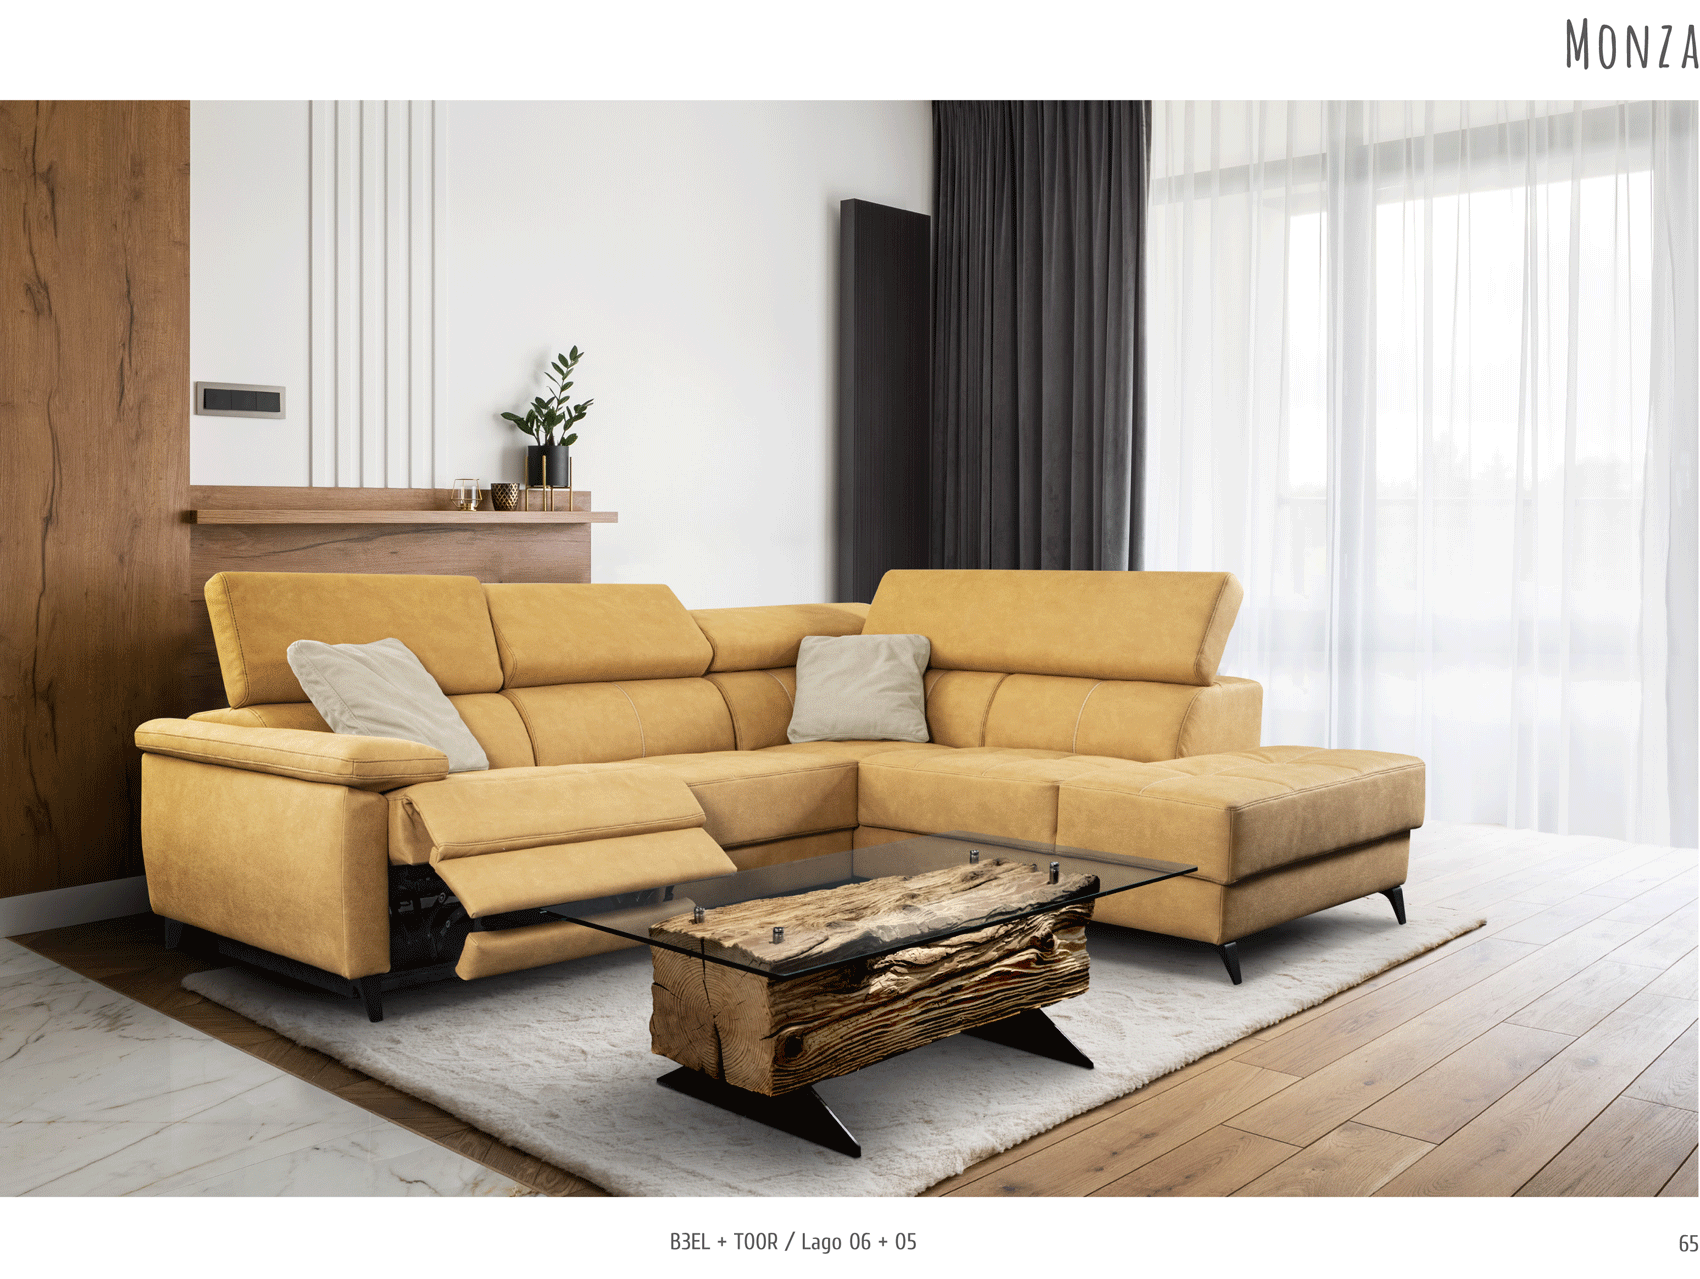 Brands WCH Modern Living Special Order Monza Sectional w/Recliner